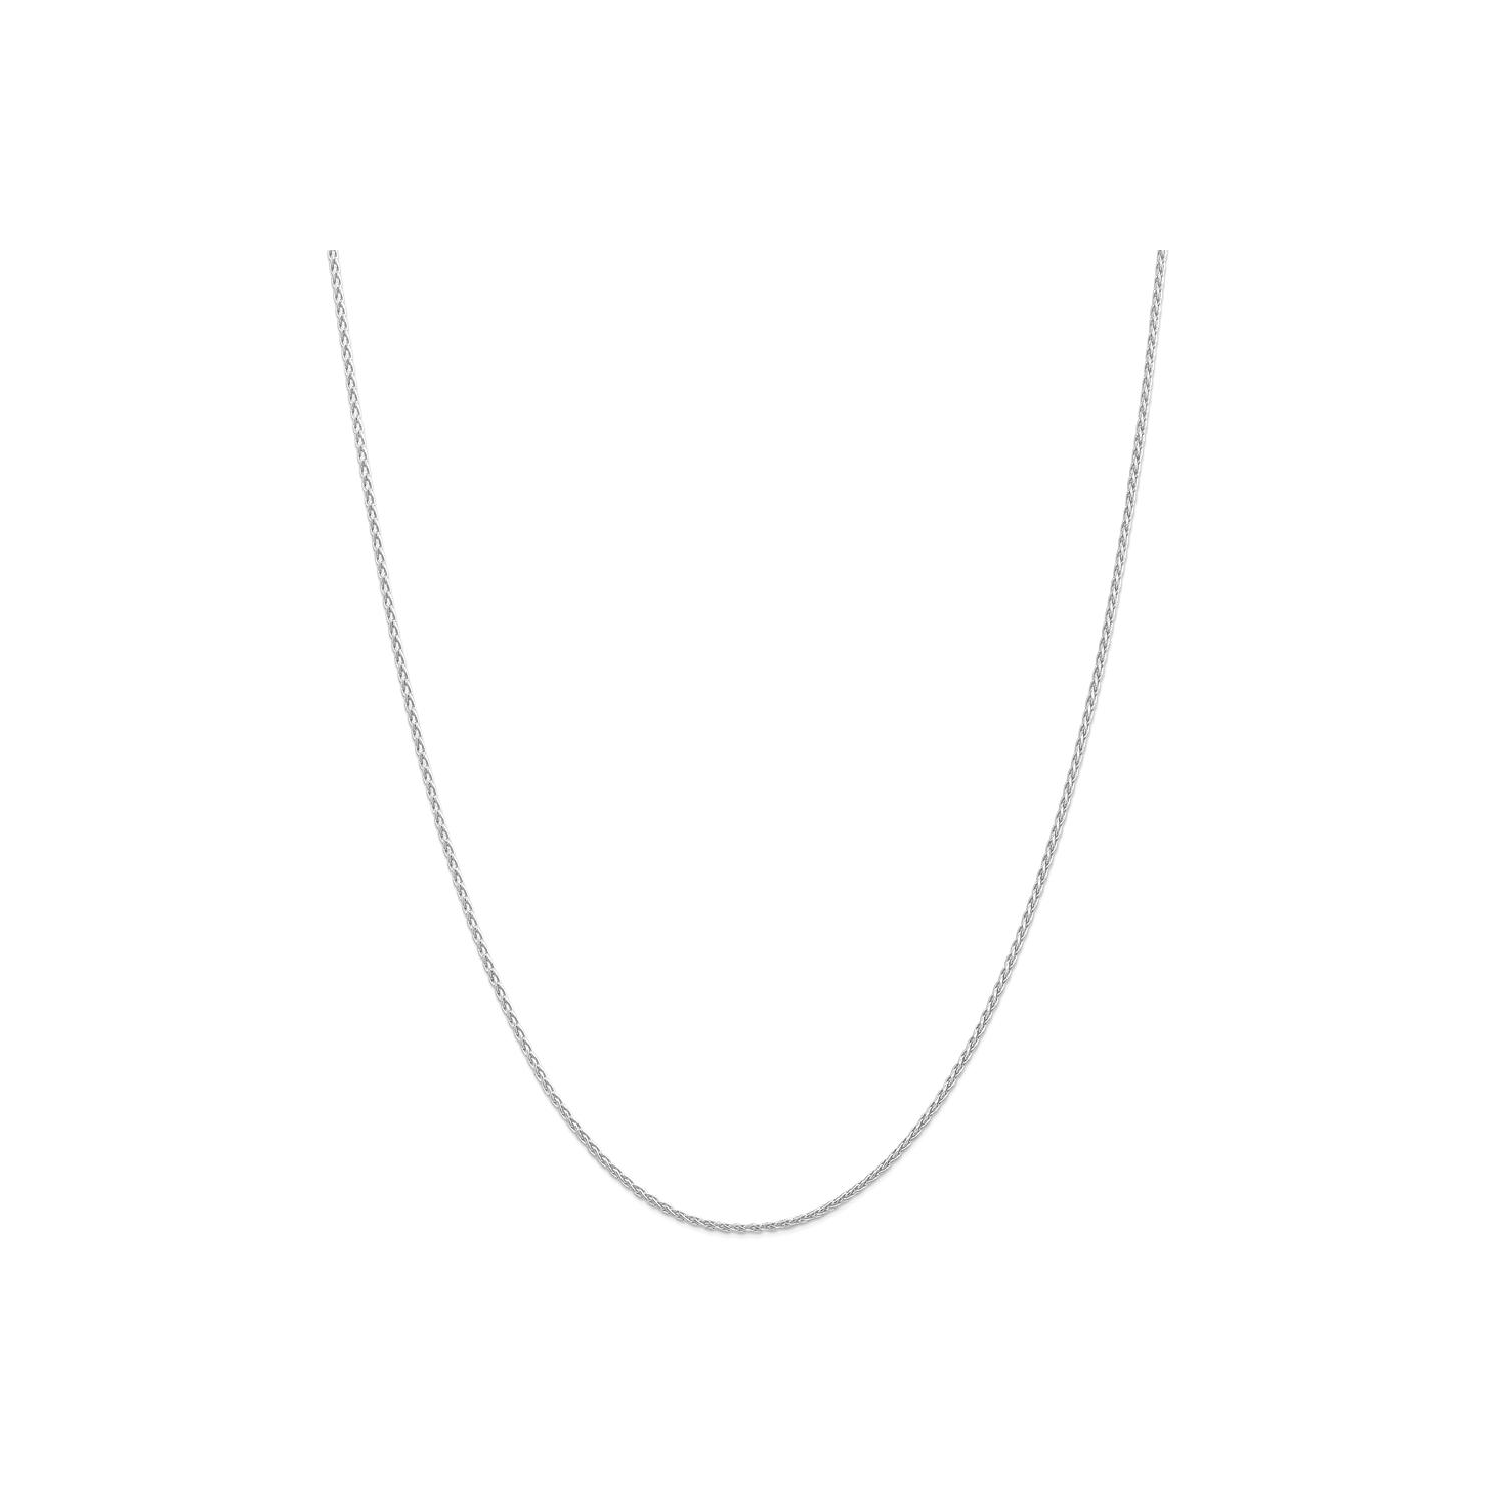 IceCarats 14k White Gold 1.5mm Parisian Link Wheat Chain Necklace 20 Inch Spiga